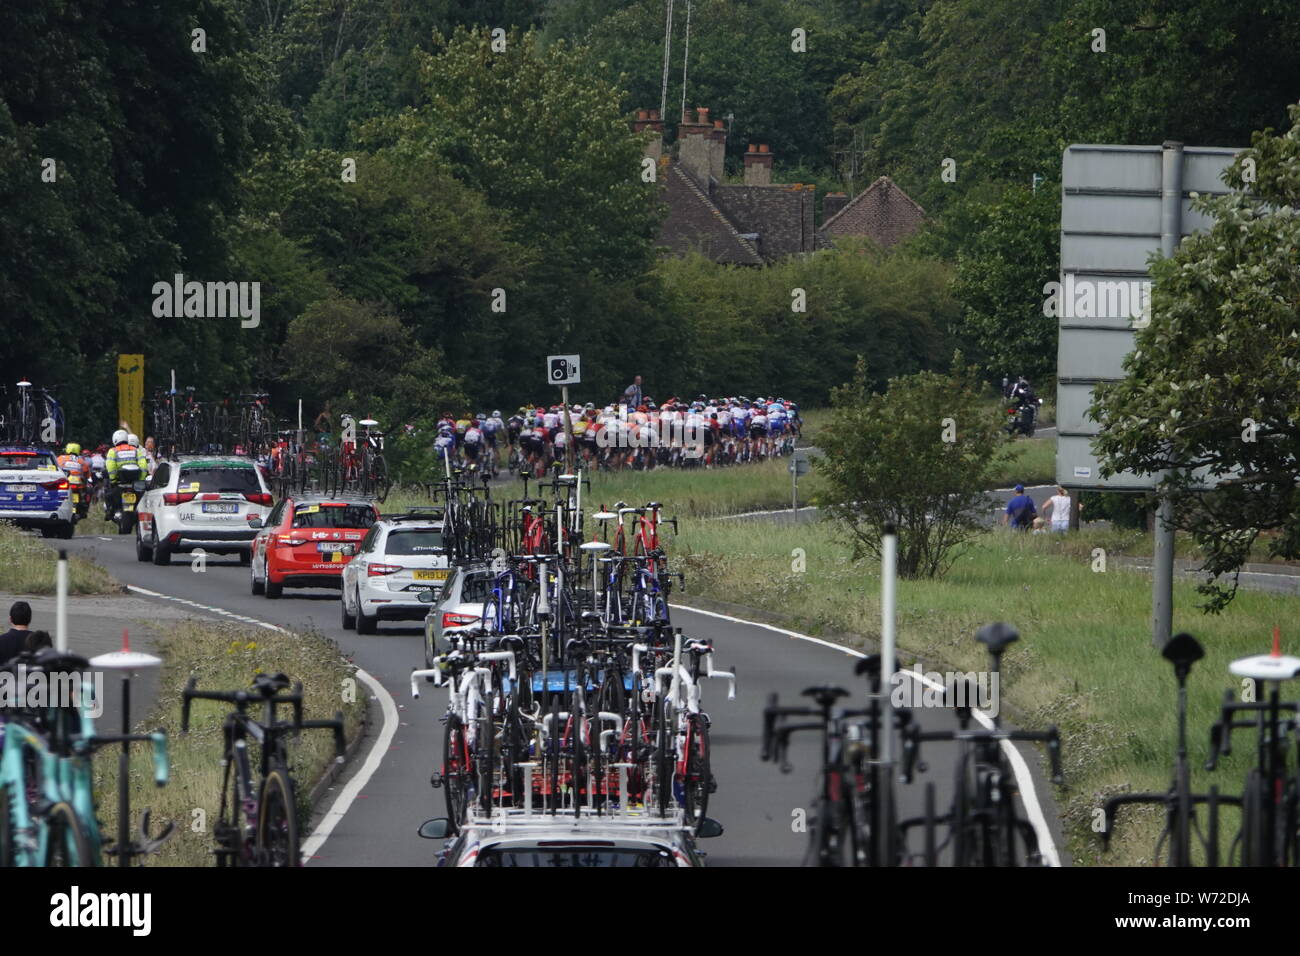 Surrey, UK. 04th Aug, 2019.   The peleton of cyclists and their support crews racing in the Prudential Ride London/Surrey Classic for Pro riders round the bend on the A24 outside Debies Vineyard in Dorking . Credit: Motofoto/Alamy Live News Stock Photo